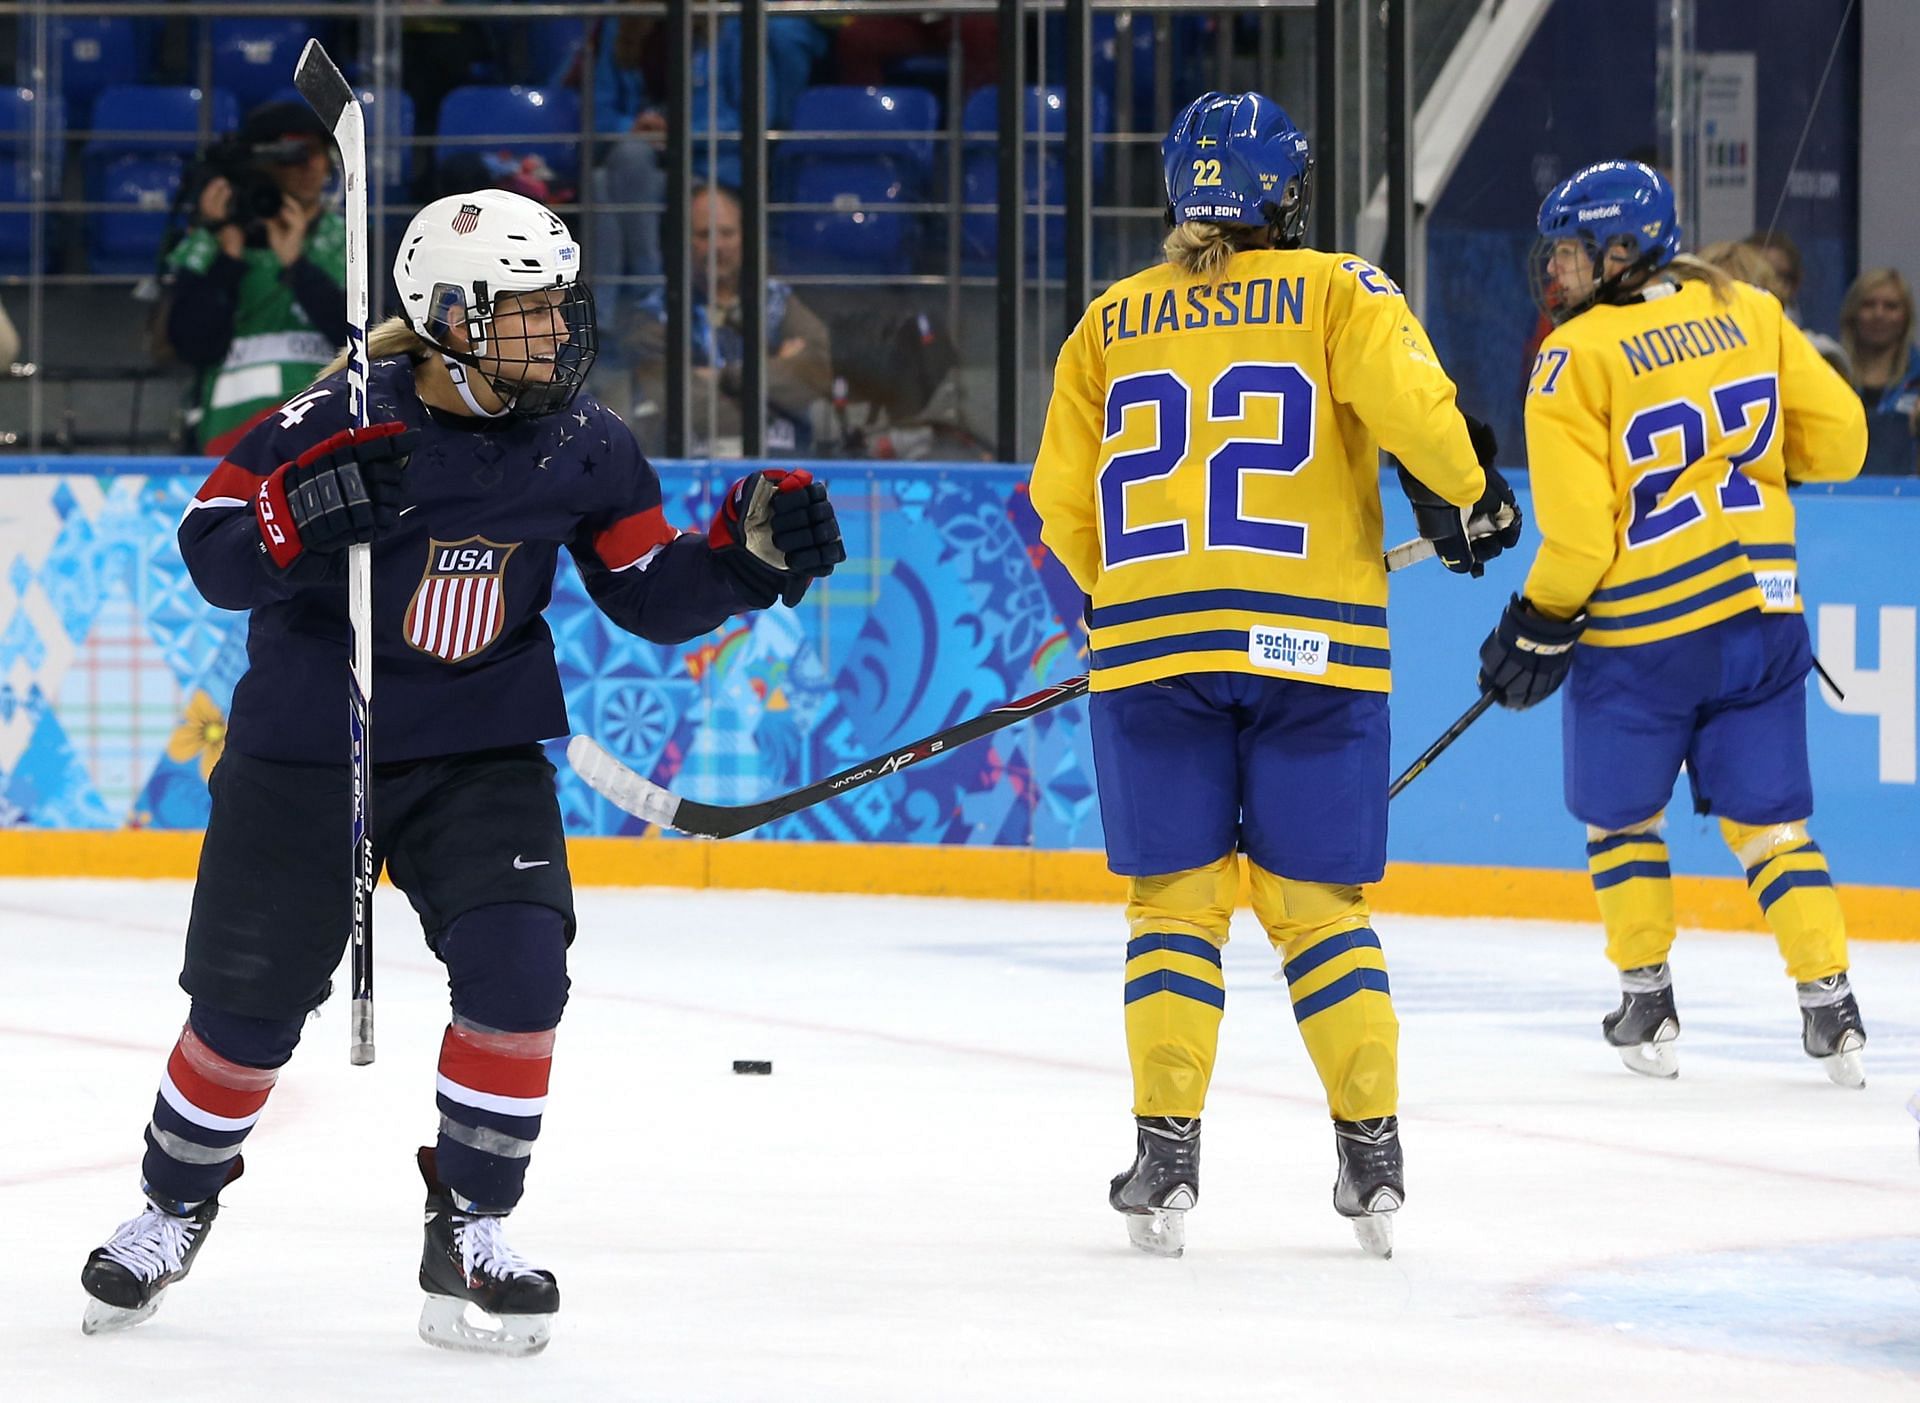 Sweden vs USA Group A How to watch, live streaming, channel list, and more 